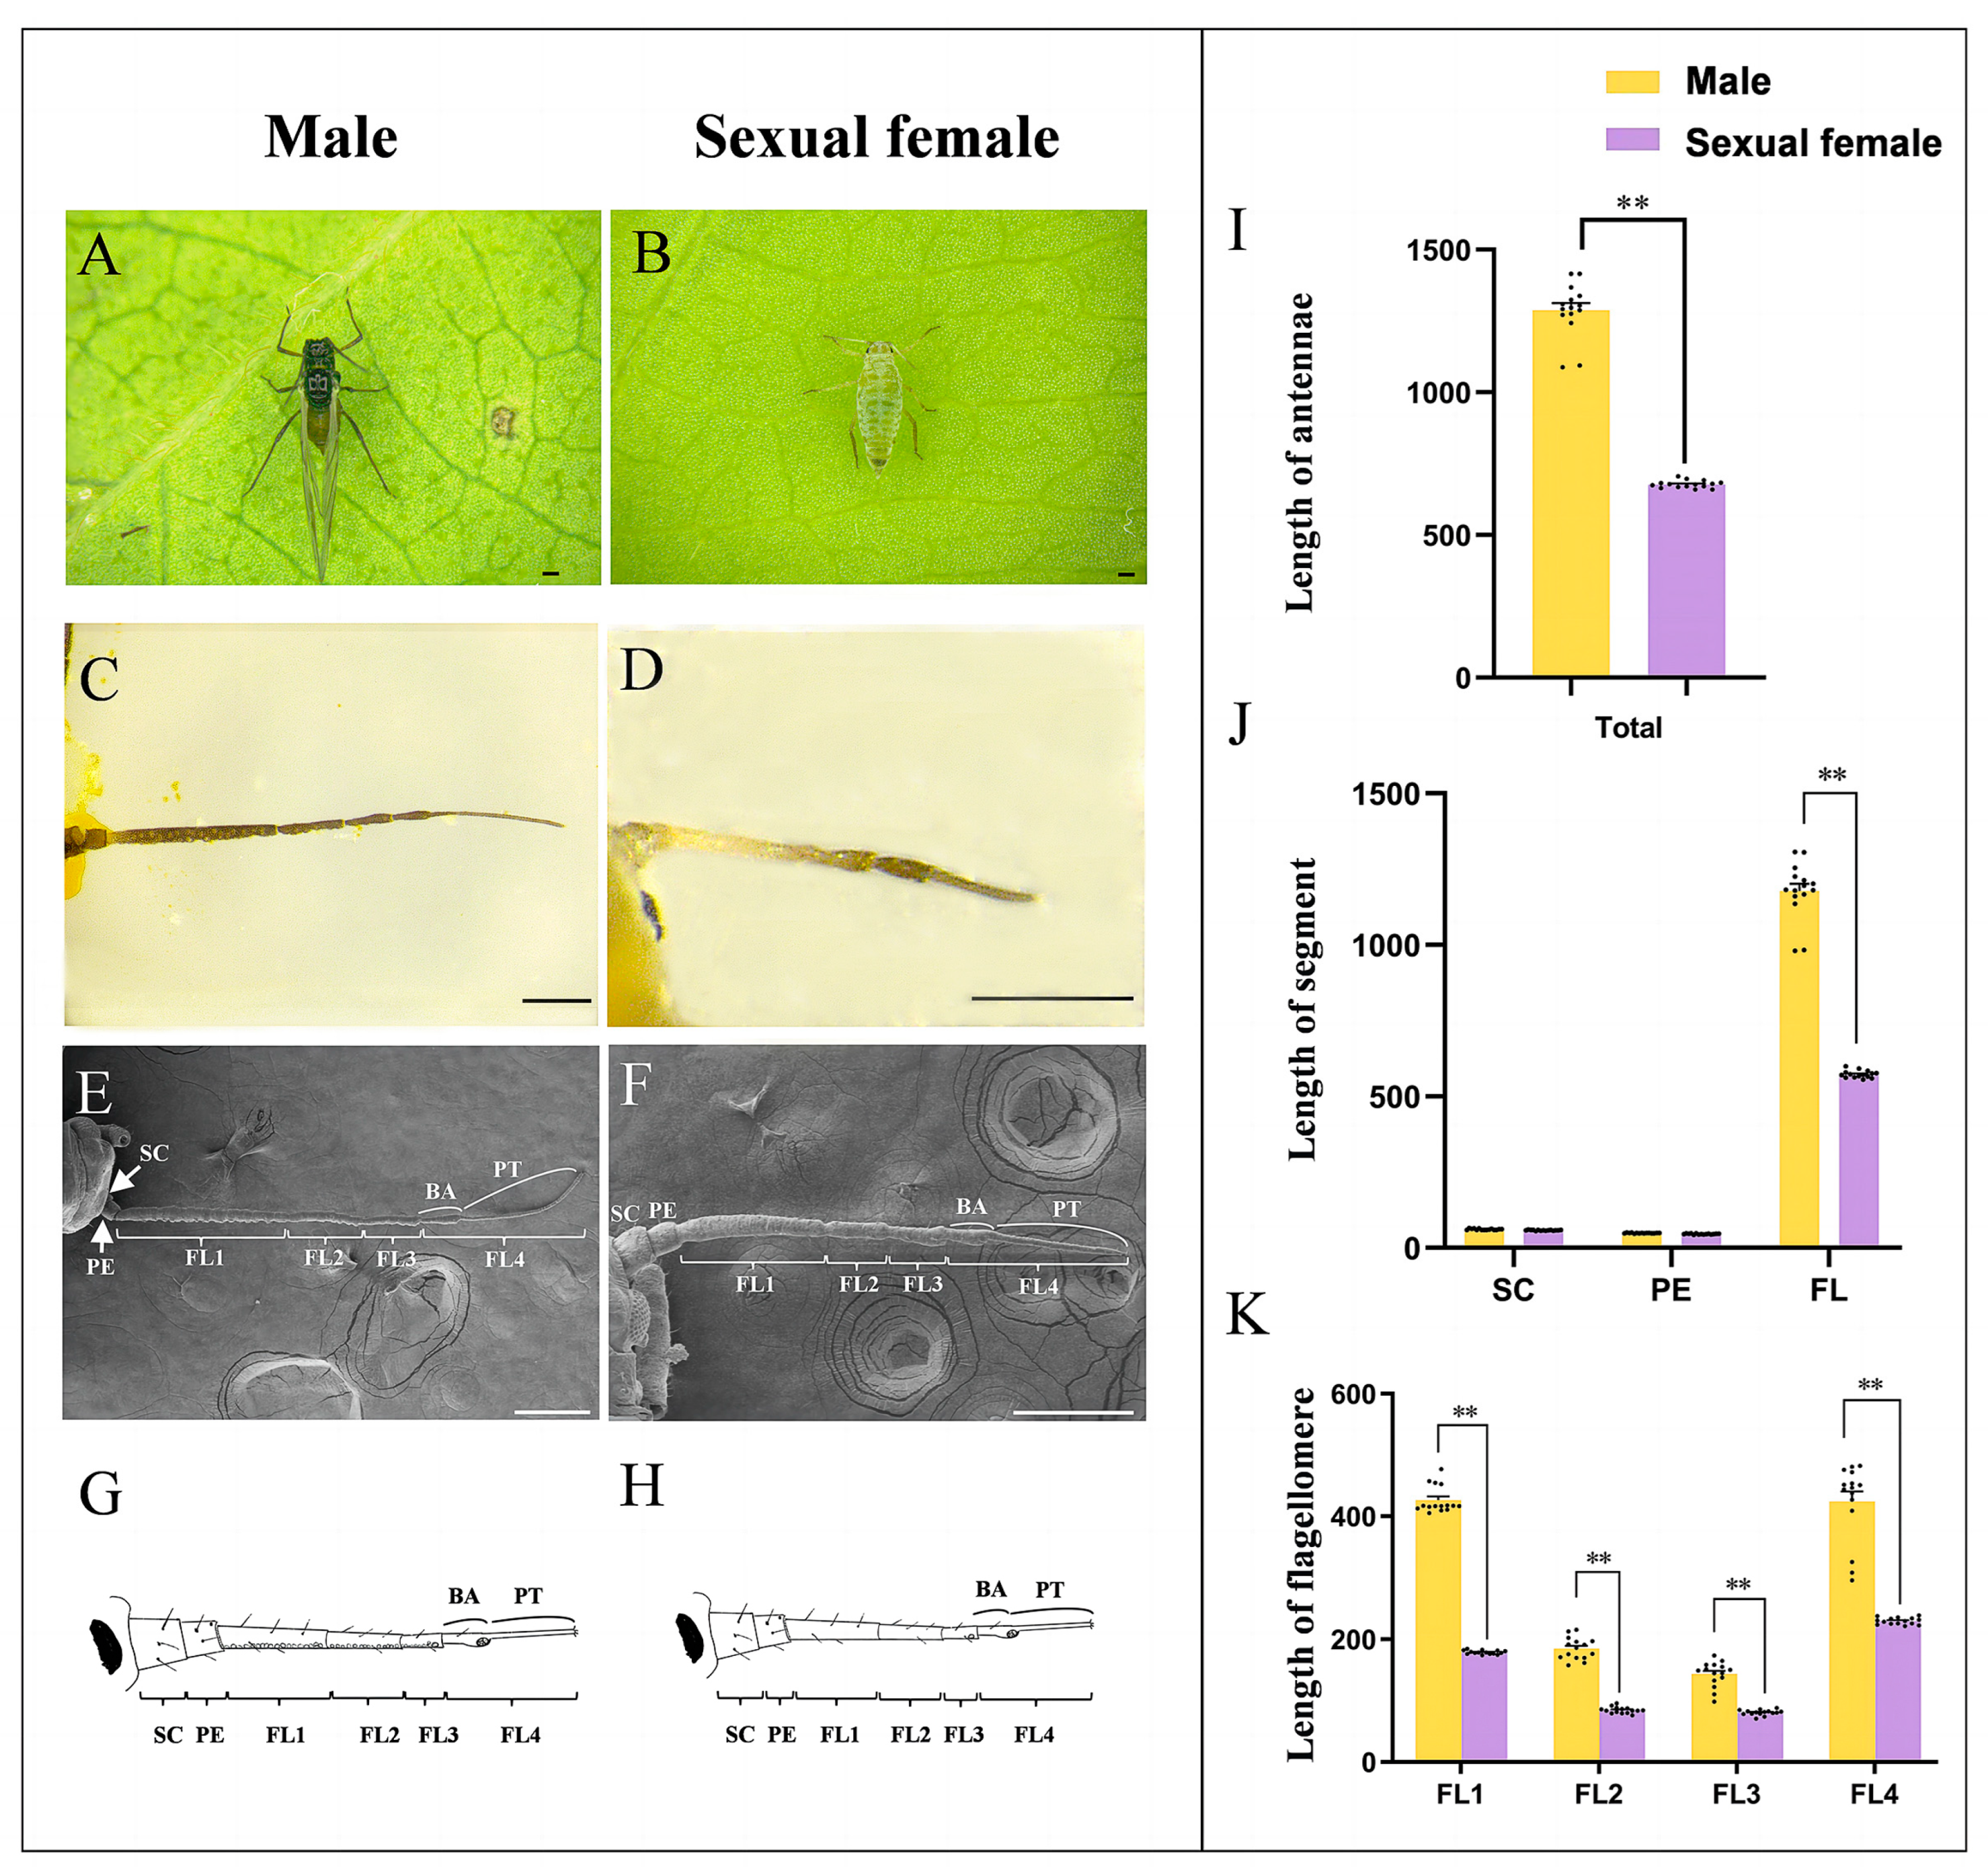 Insects Free Full-Text Secondary Rhinaria Contribute to Major Sexual Dimorphism of Antennae in the Aphid Semiaphis heraclei (Takahashi)